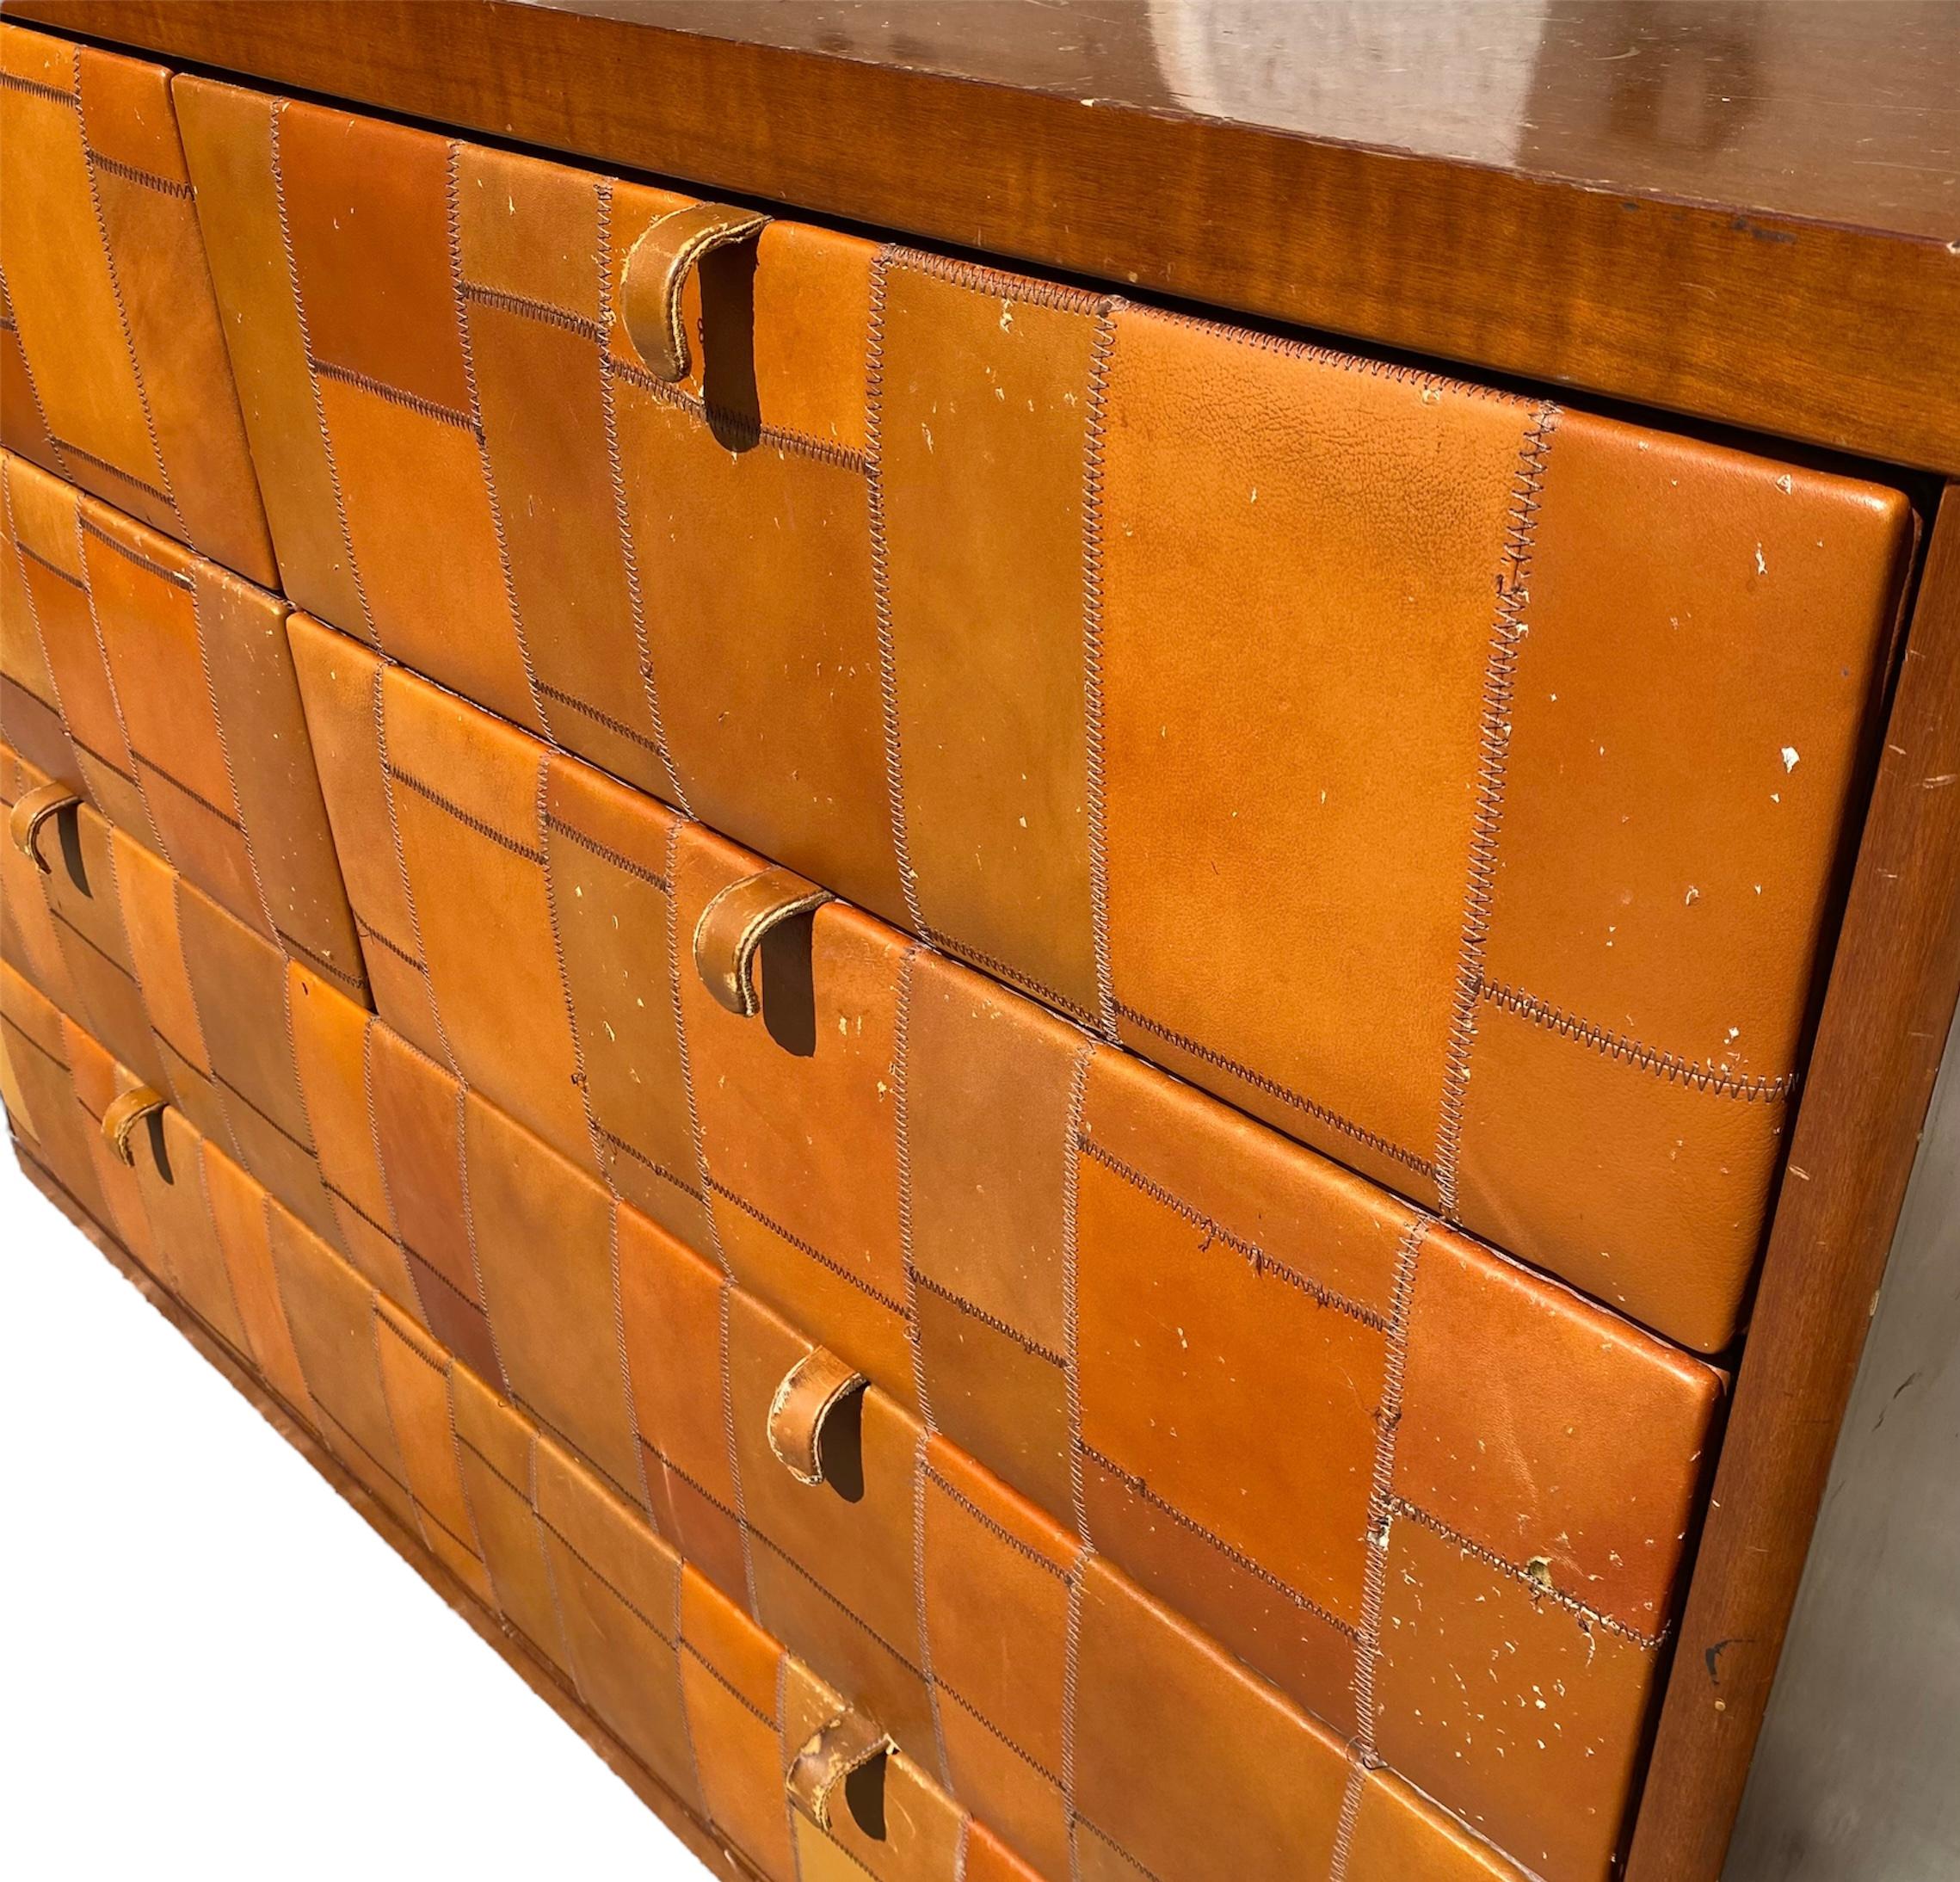 Late 20th Century Chest Of Drawers in Pecary leather by Tito Agnoli for Caleido\Poltrona Frau For Sale